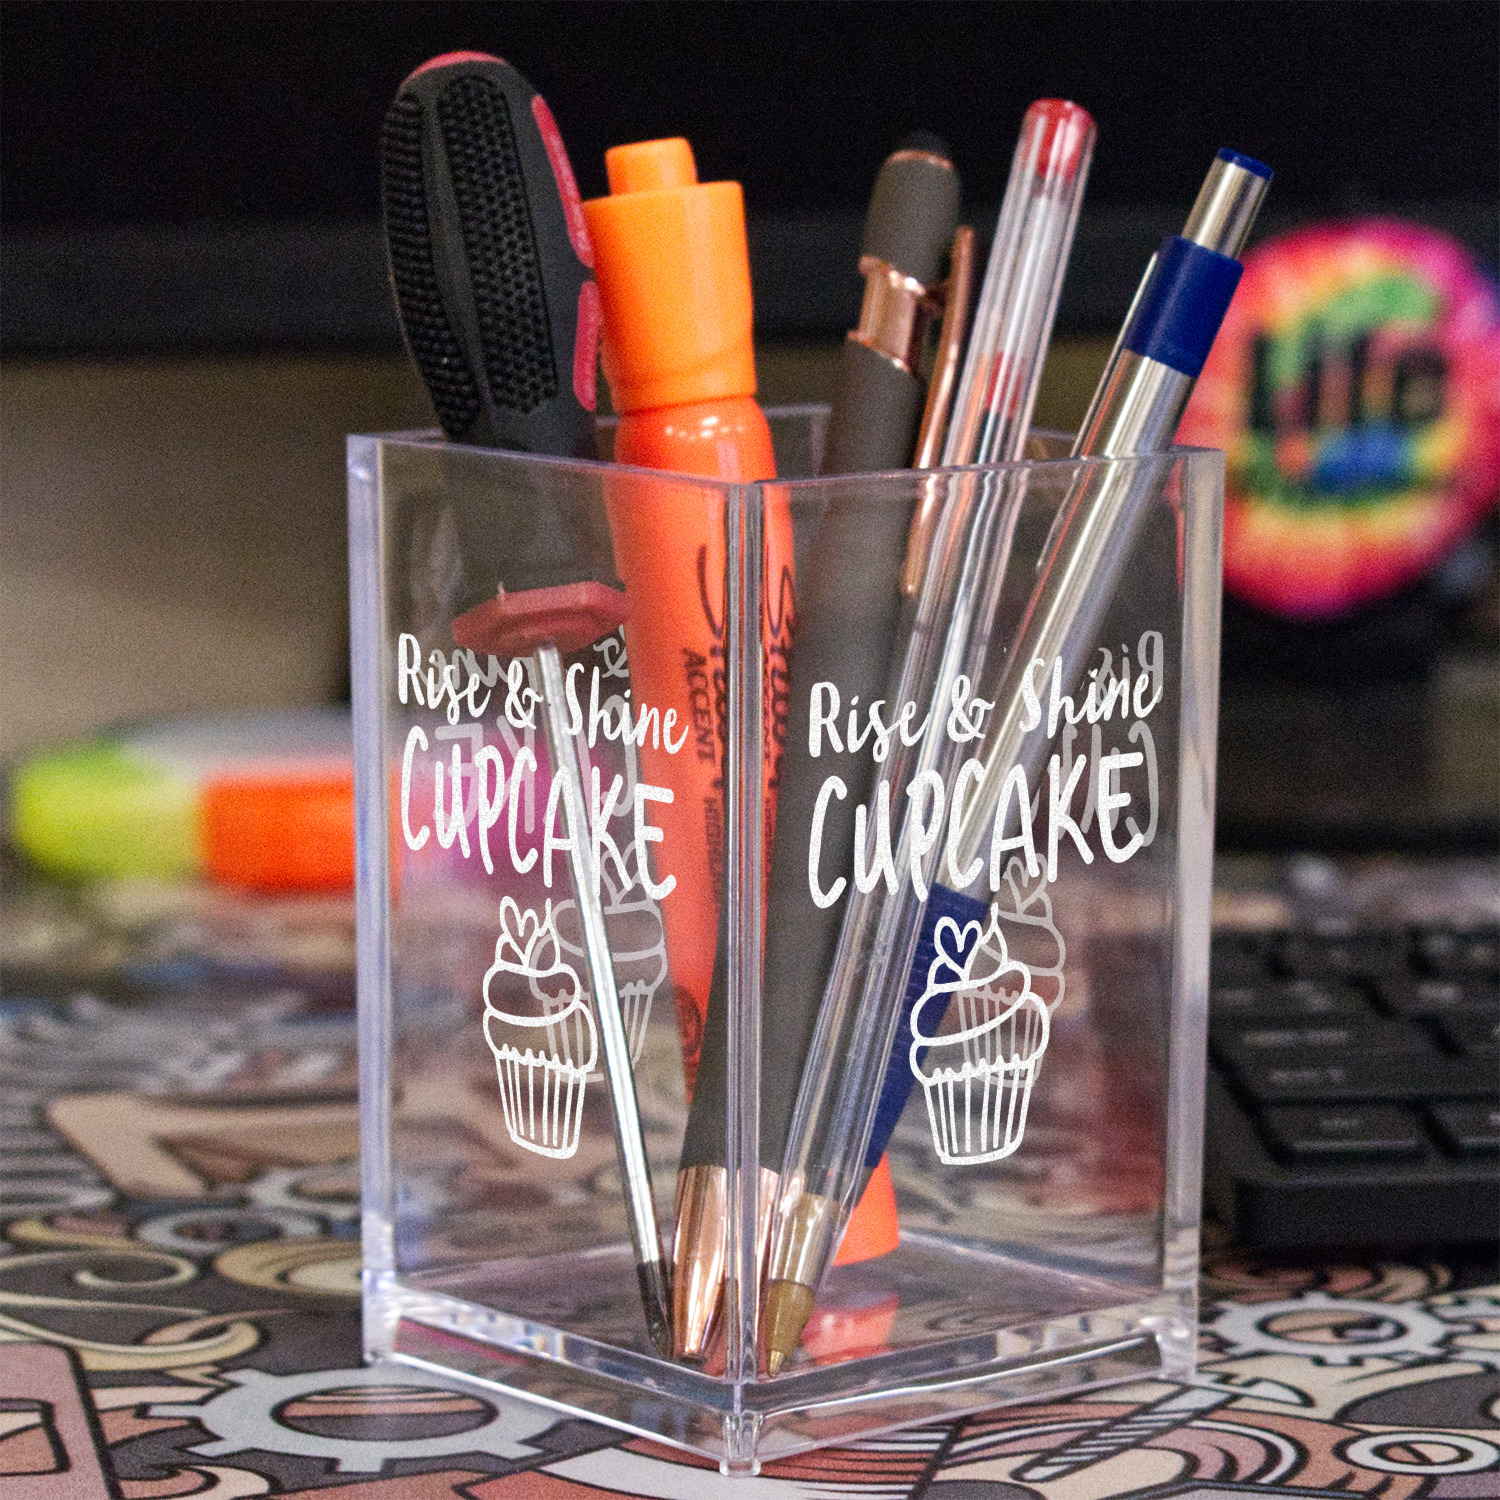 https://www.youcustomizeit.com/common/MAKE/1038068/Cute-Quotes-and-Sayings-Acrylic-Pen-Holder-In-Context.jpg?lm=1679500202